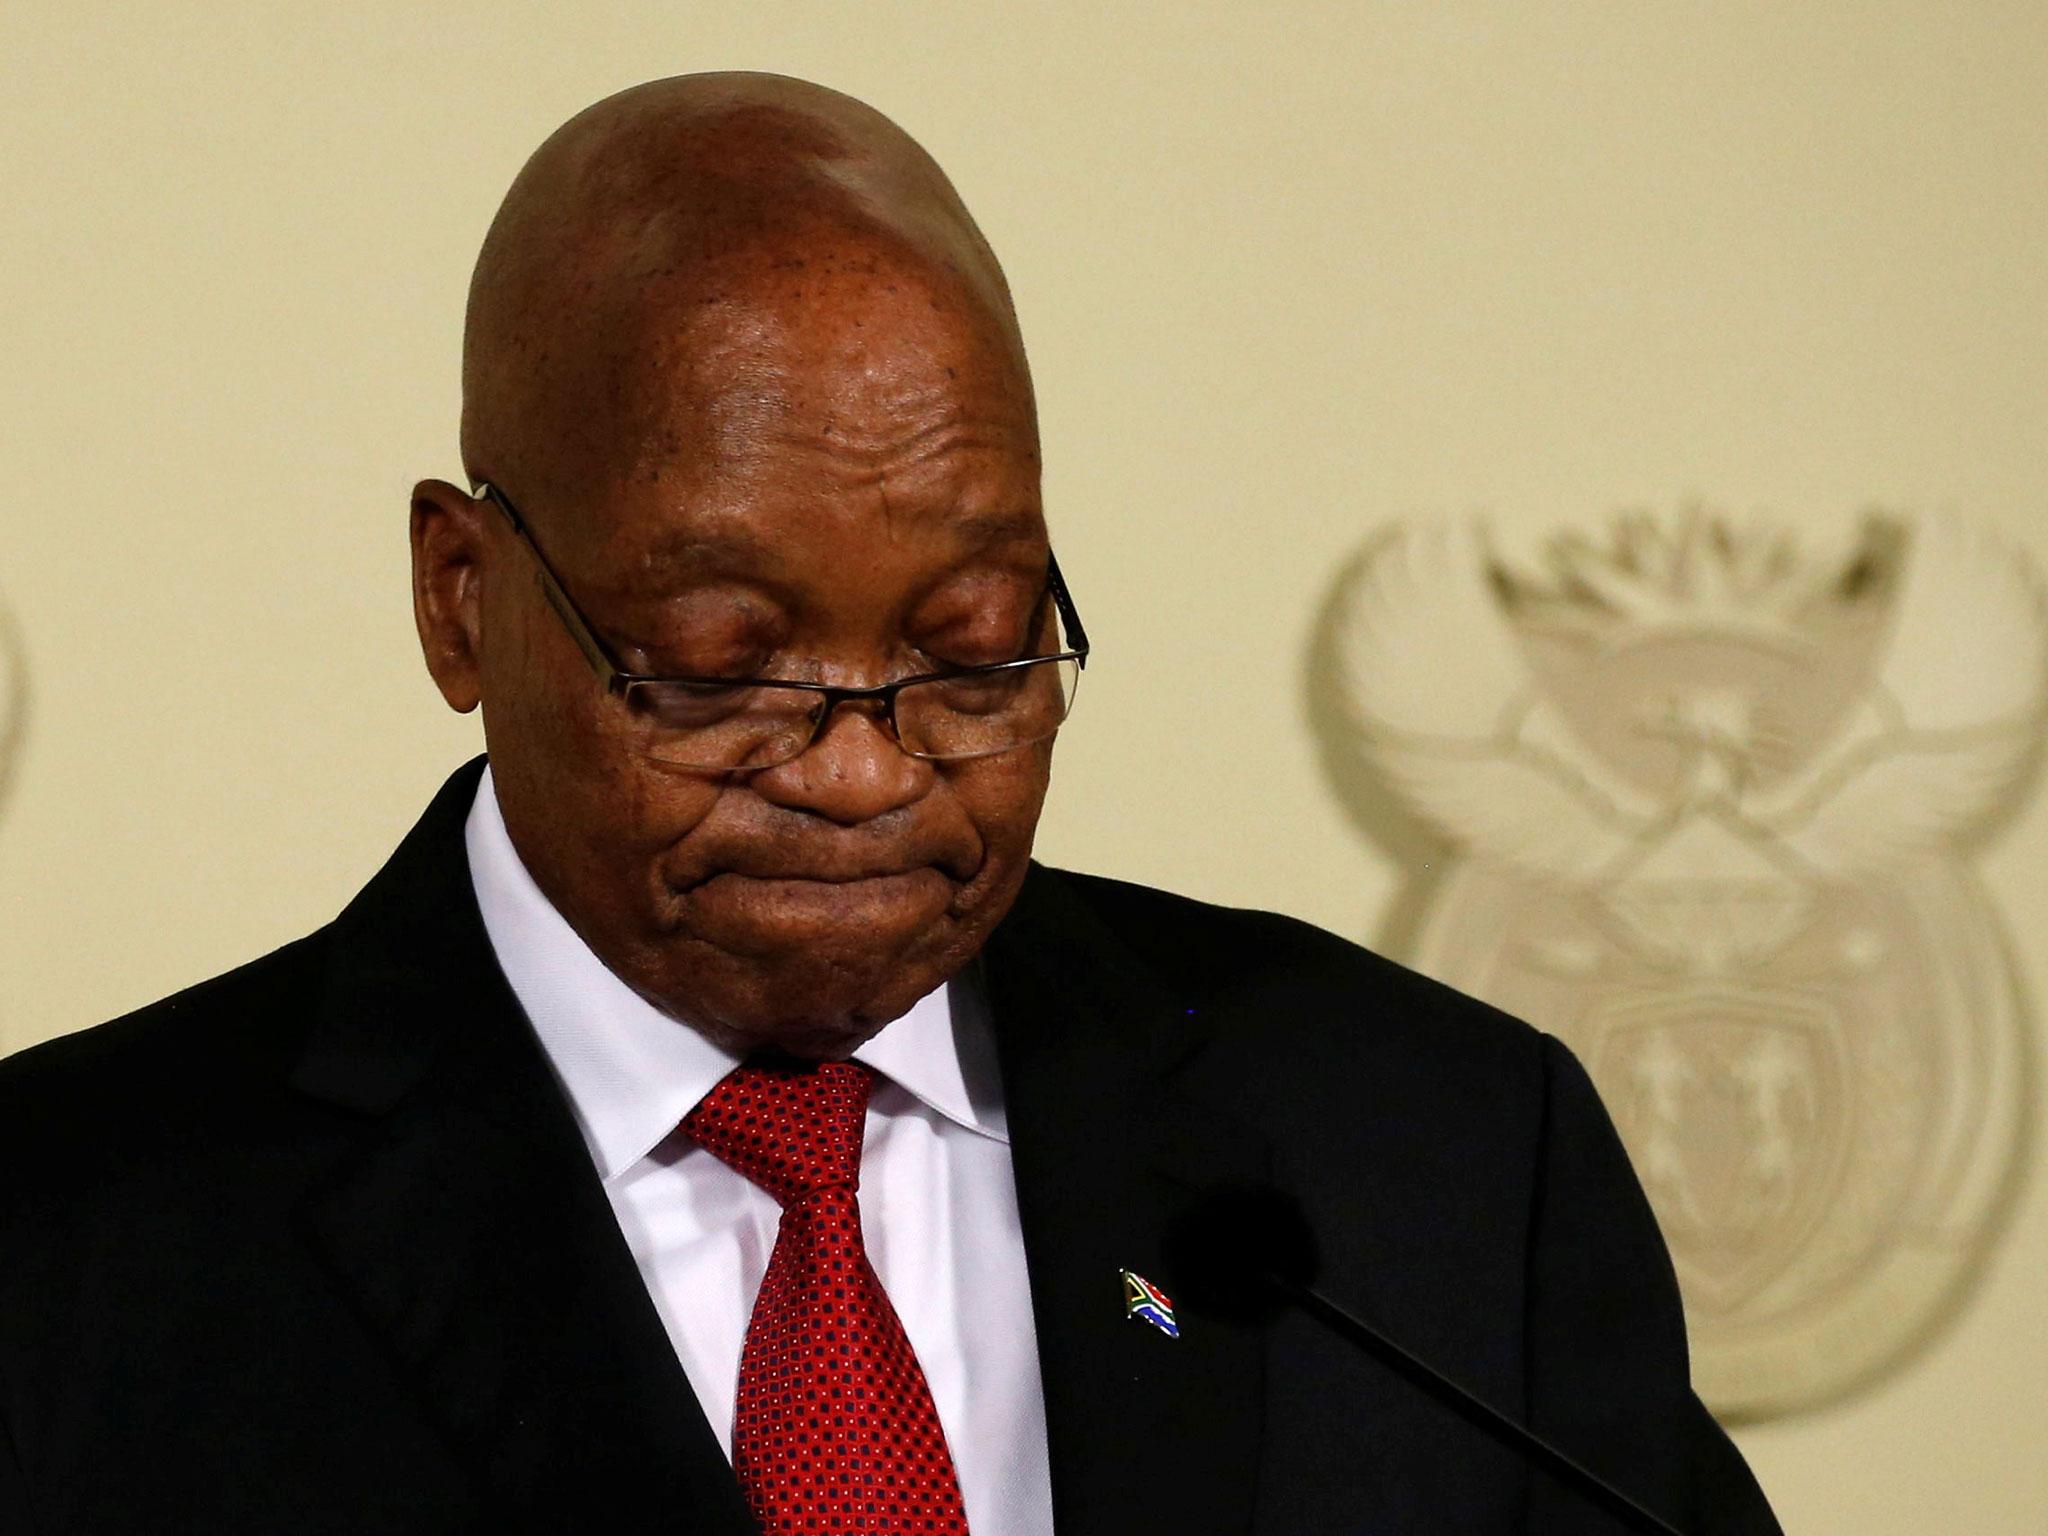 South Africa's President Jacob Zuma looks down as he speaks at the Union Buildings in Pretoria